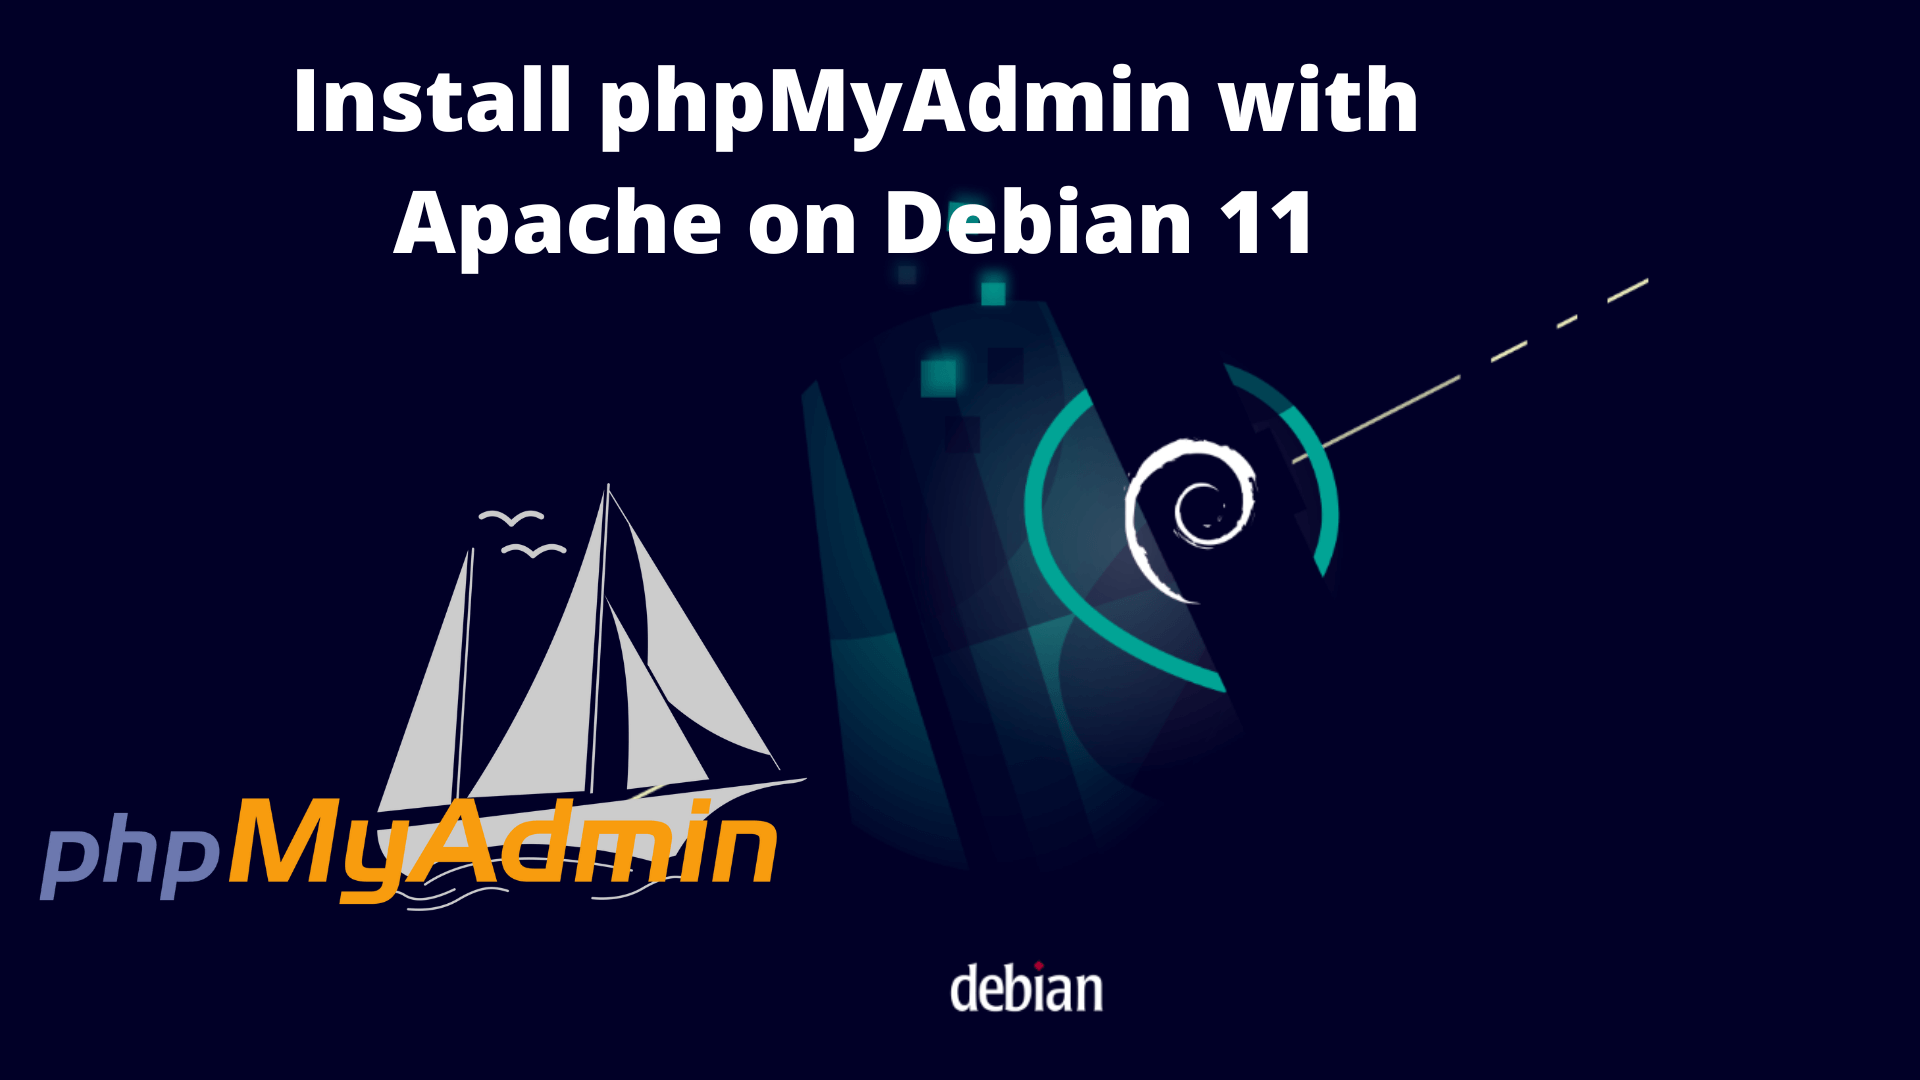 Install phpMyAdmin with Apache on Debian 11